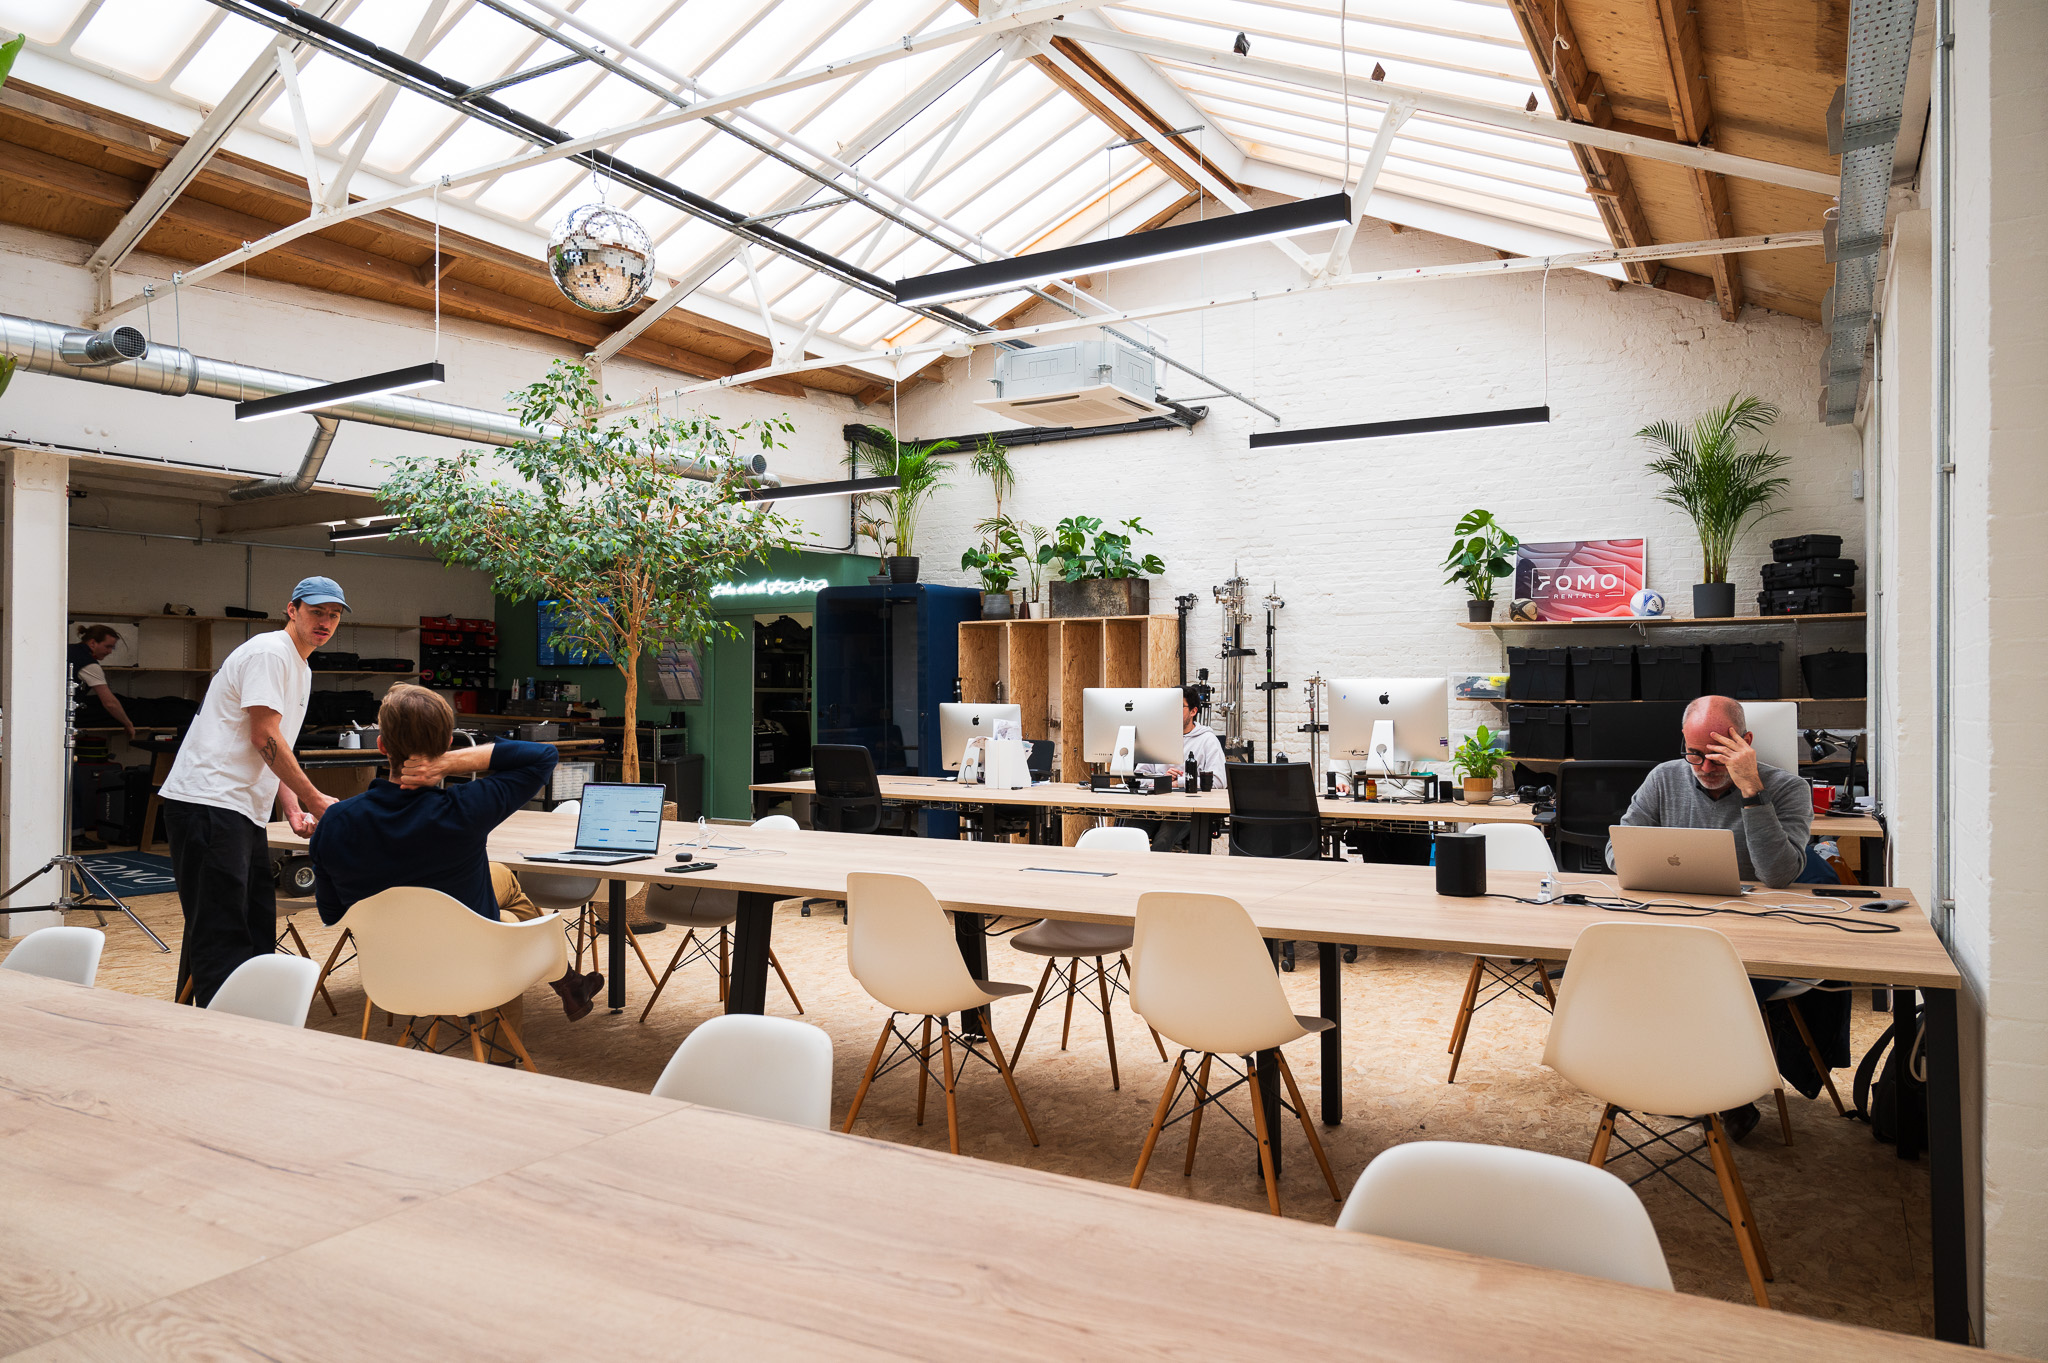 FOMO's small floor plate office space